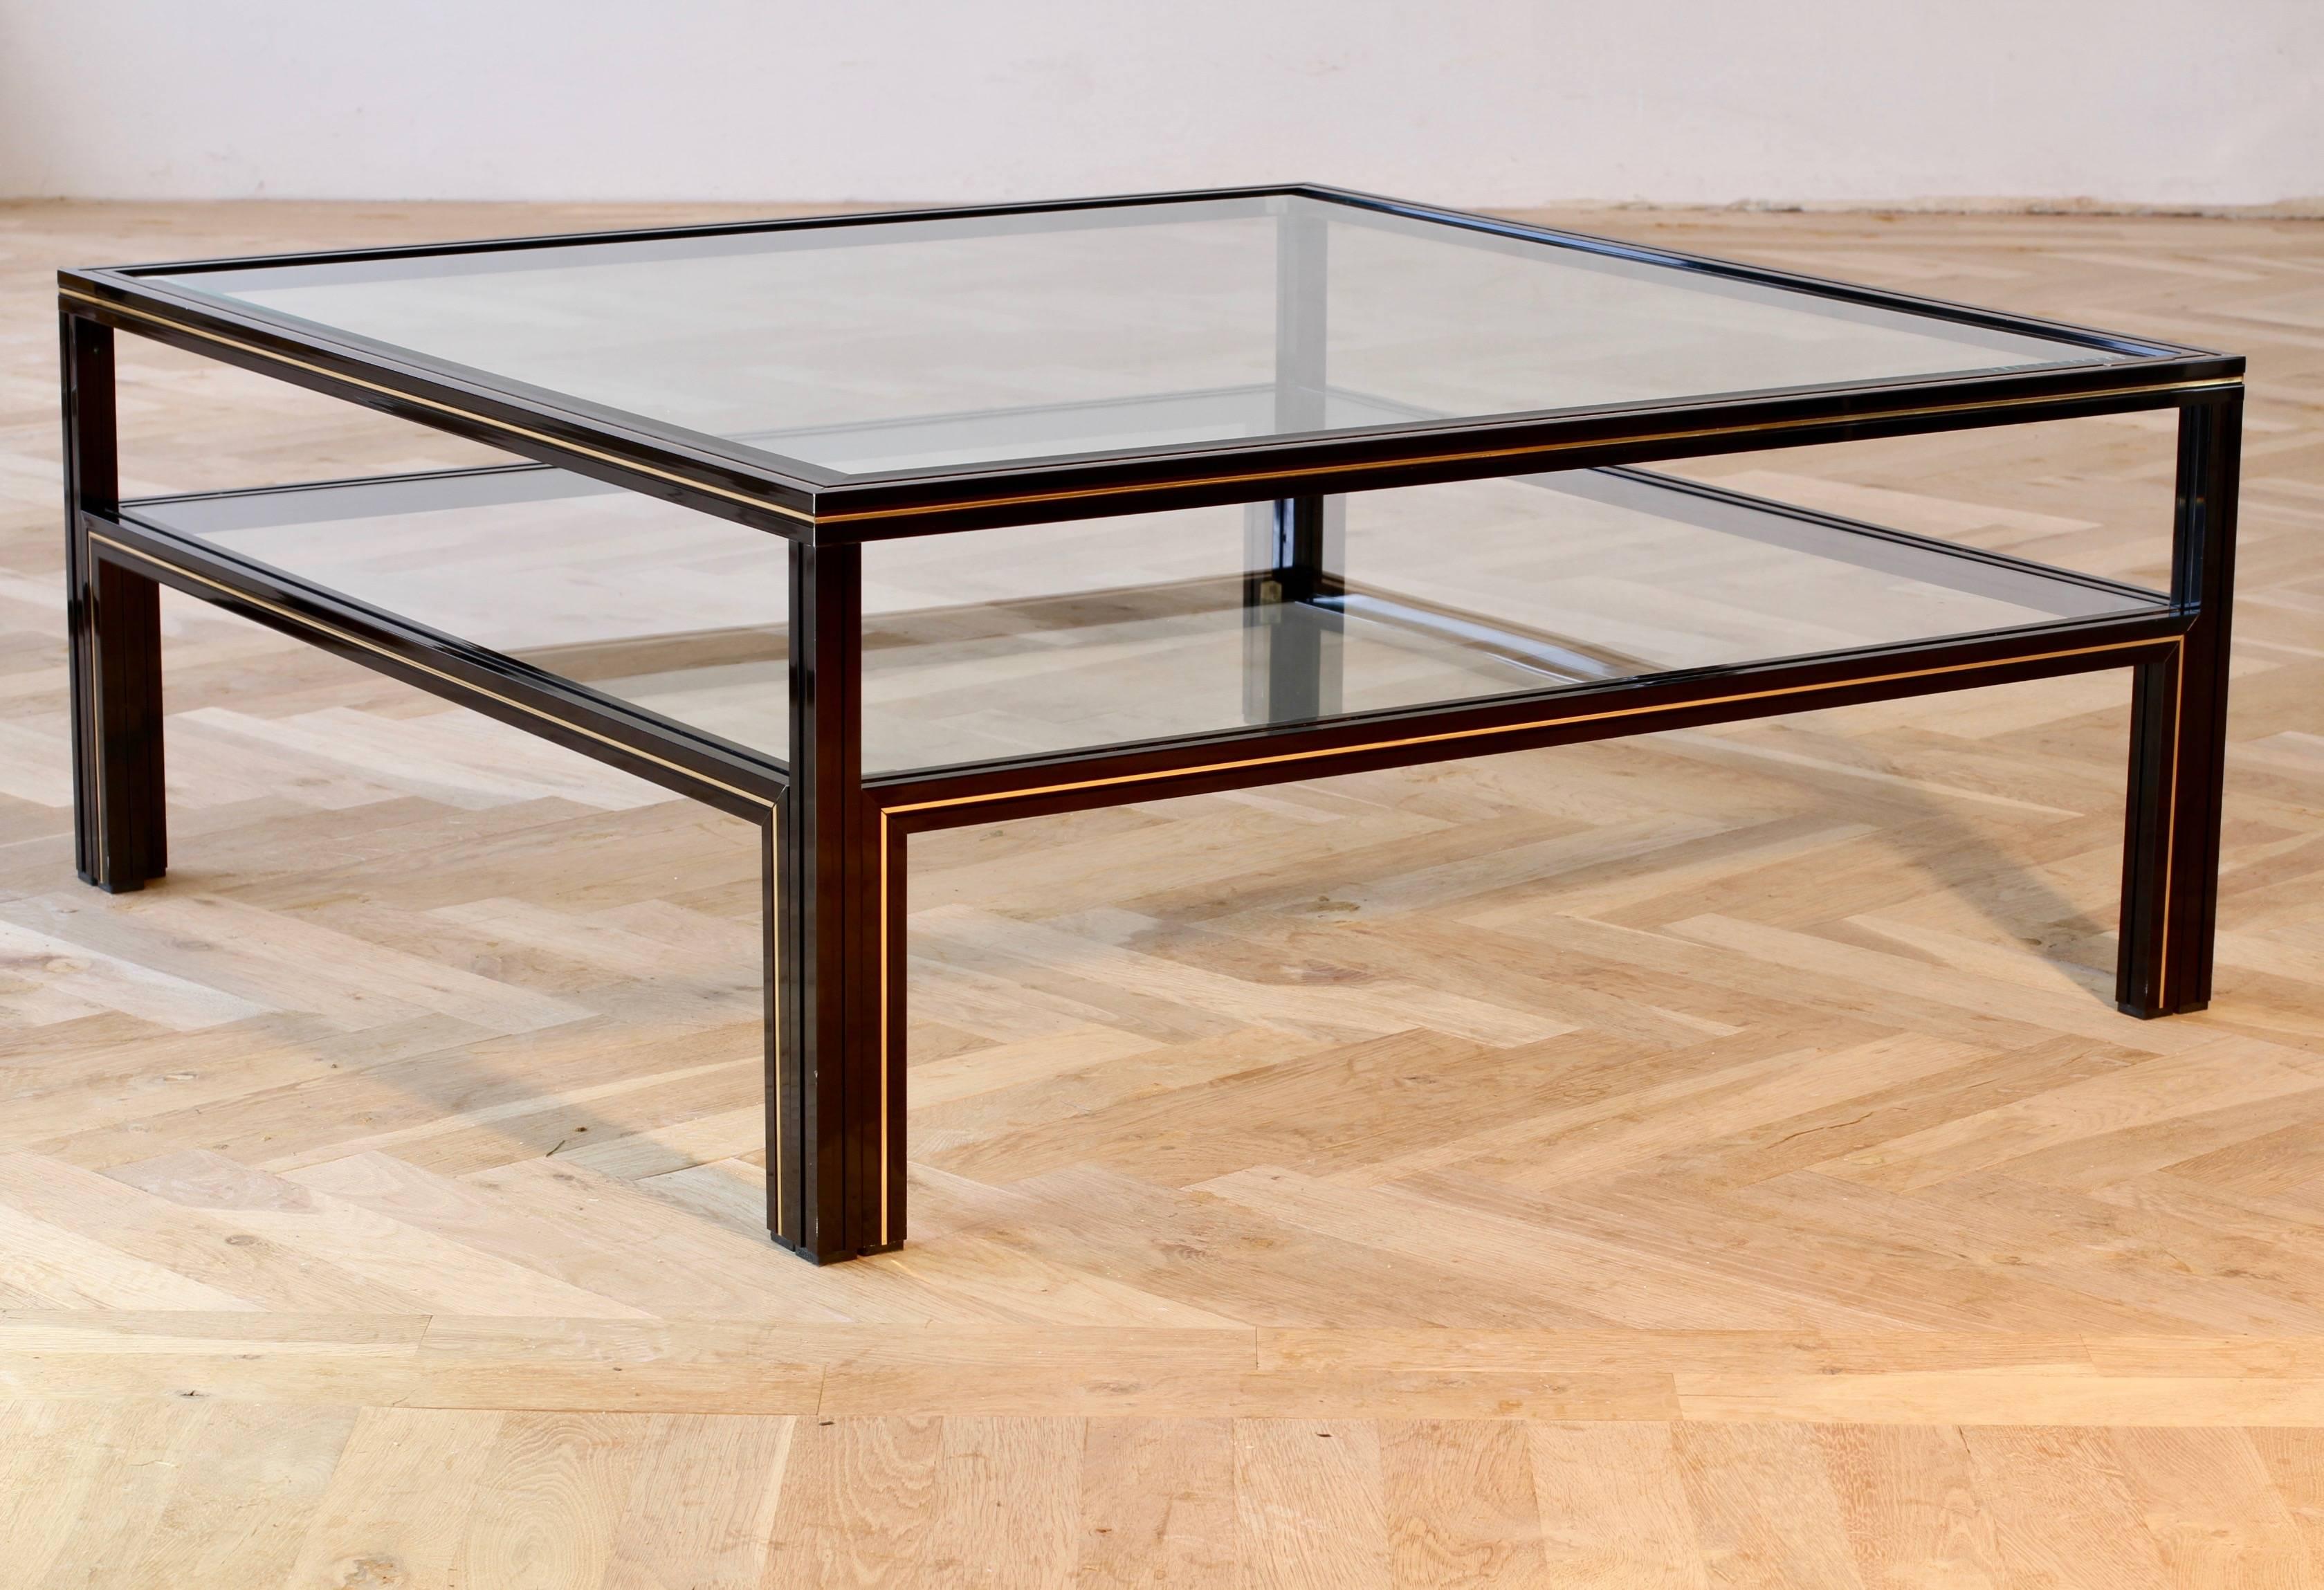 Stunning large, two-tiered square centre coffee table by Paris based French designer Pierre Vandel featuring a double shelved frame made of black powder coated aluminium, making it light whilst extremely strong and durable. The legs and top sections